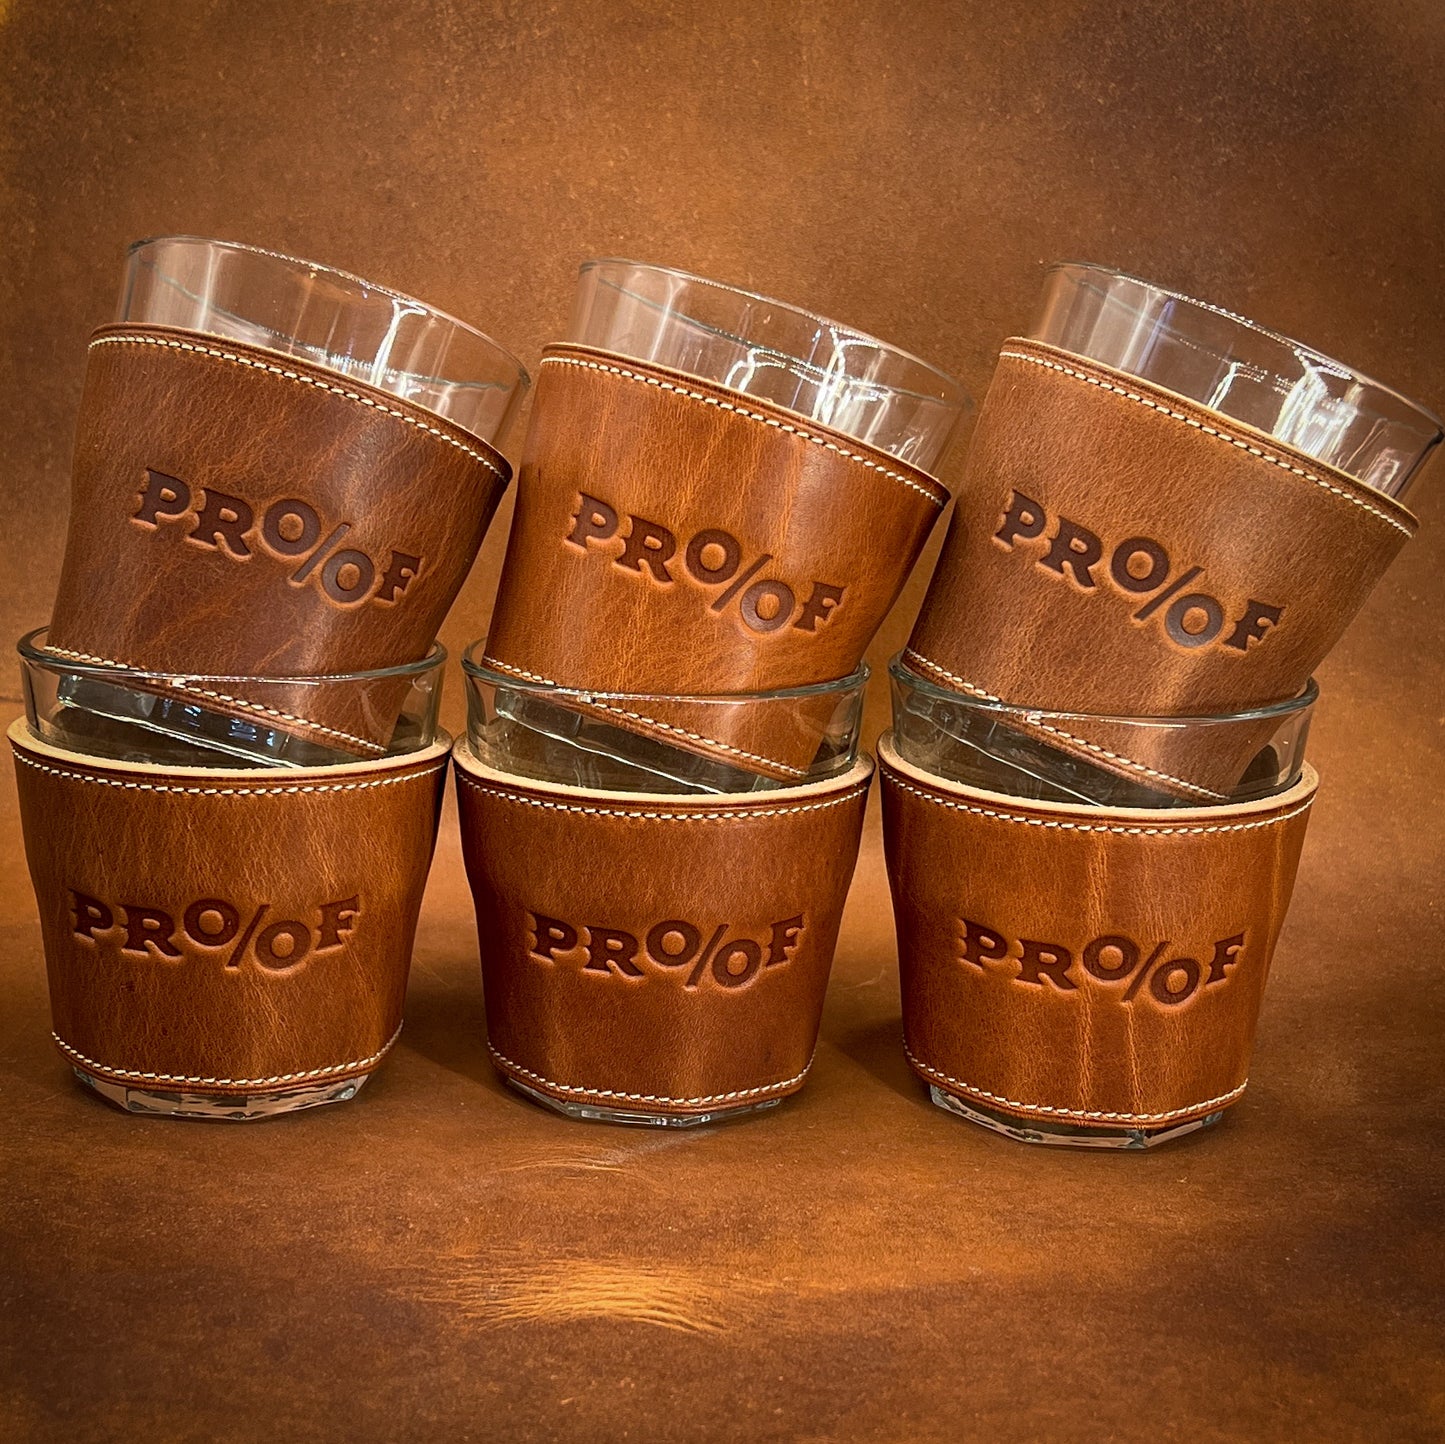 Promotional Leather Whiskey Glasses for Proof Ice Cream in Horween leather